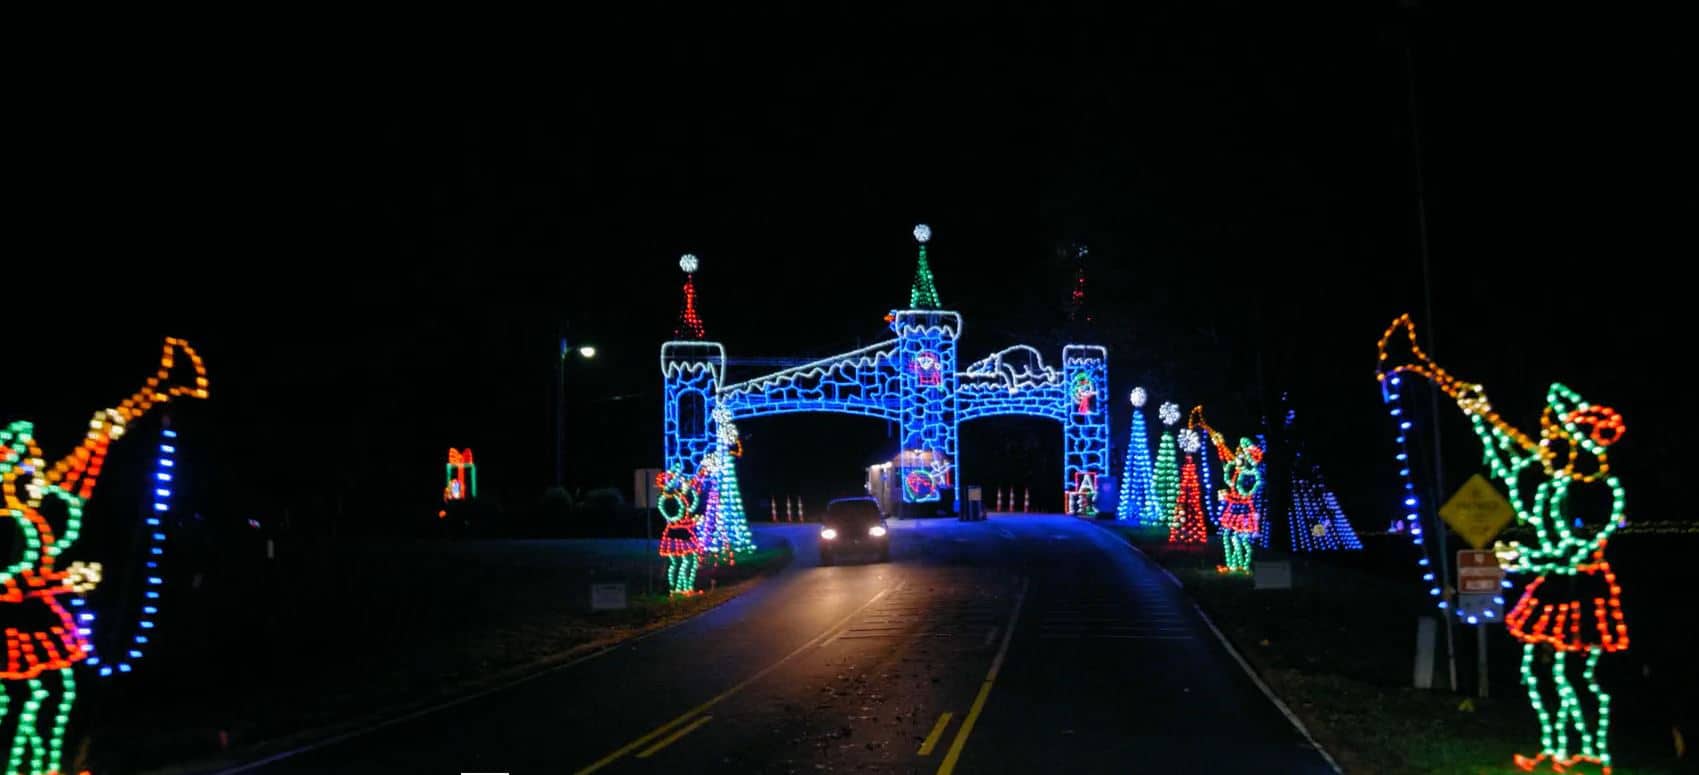 Lighted castle entrance spans the road at the Tanglewood Festival of Lights